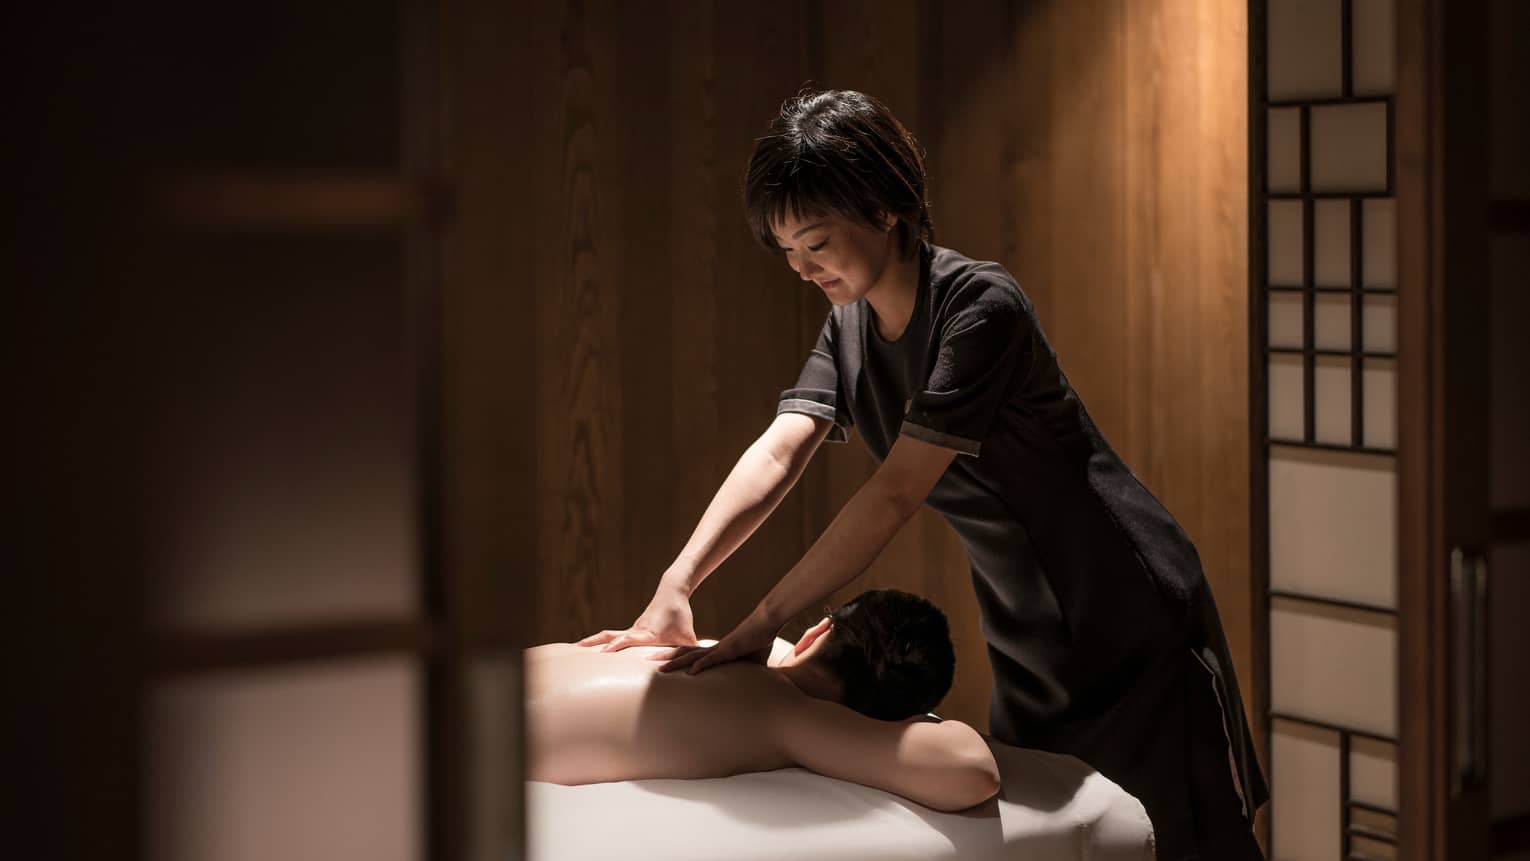 Man lies face-down on massage table as masseuse in black uniform rubs his shoulders